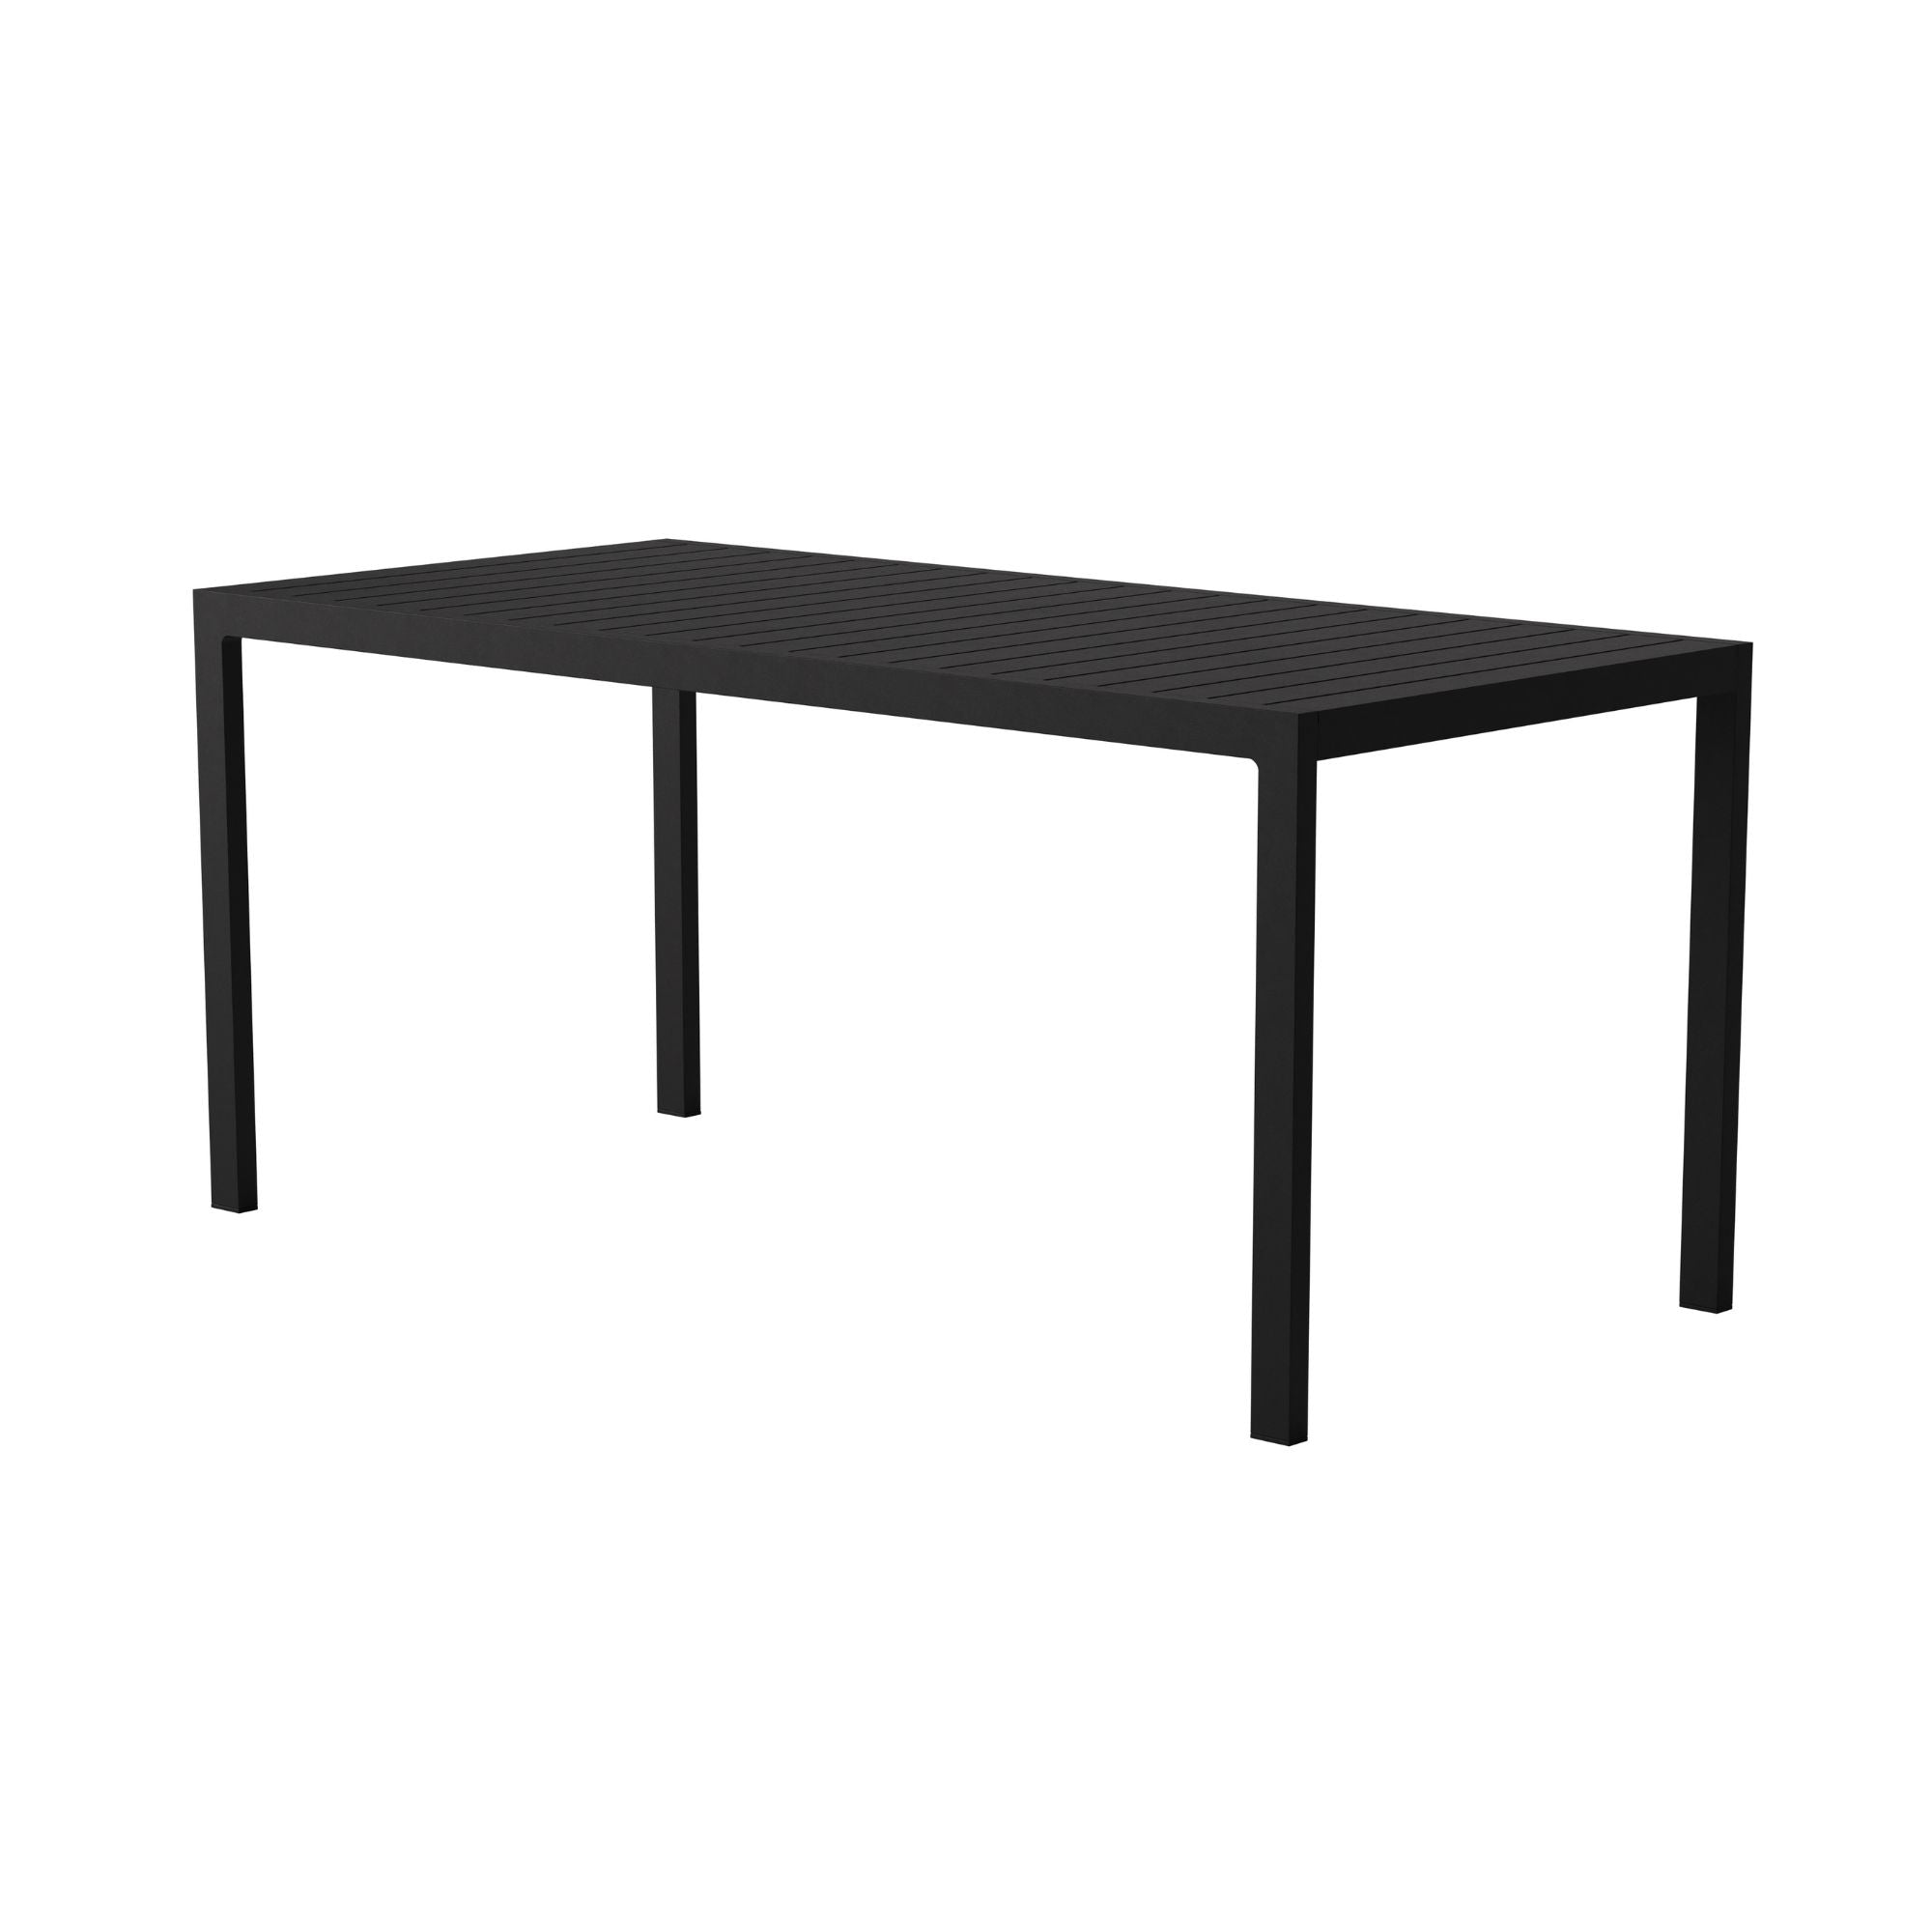 Eos Rectangular Table - THAT COOL LIVING